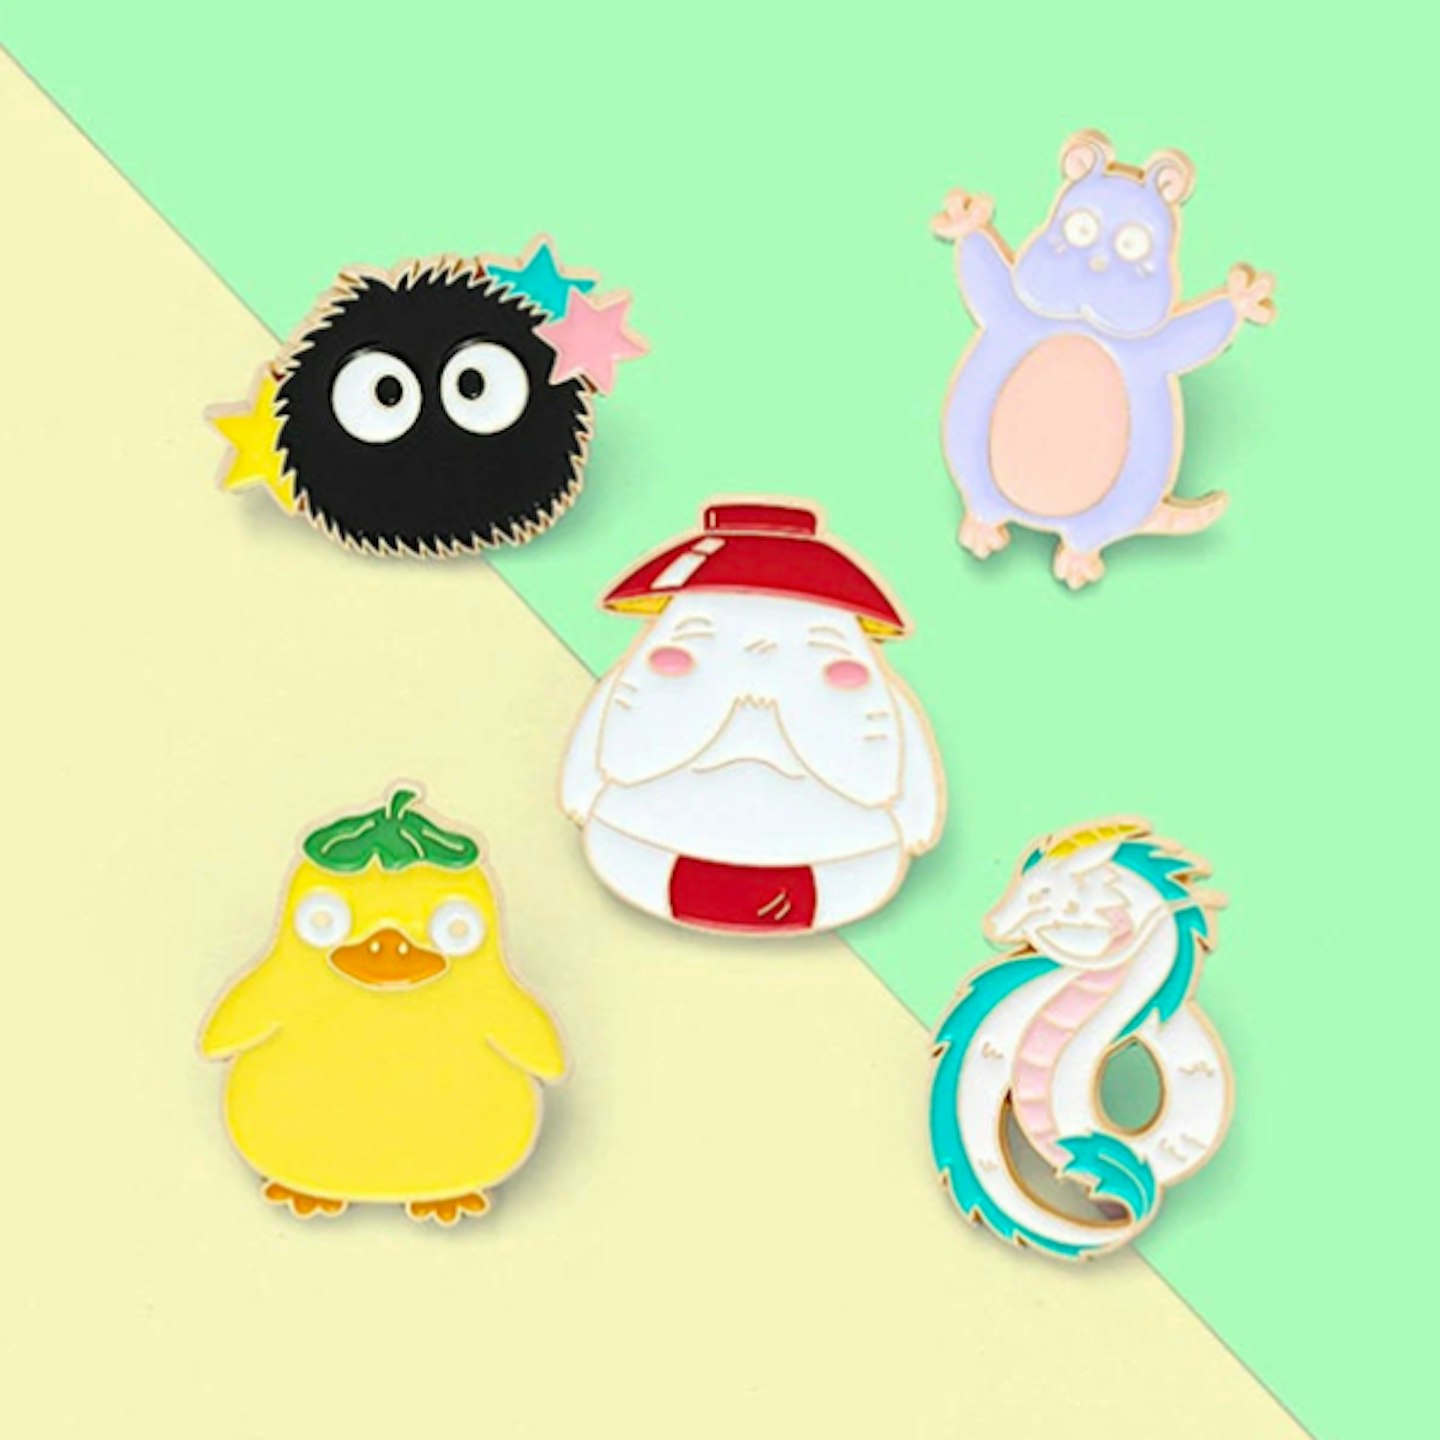 Top 10 Official Studio Ghibli Merchandise Available On .com